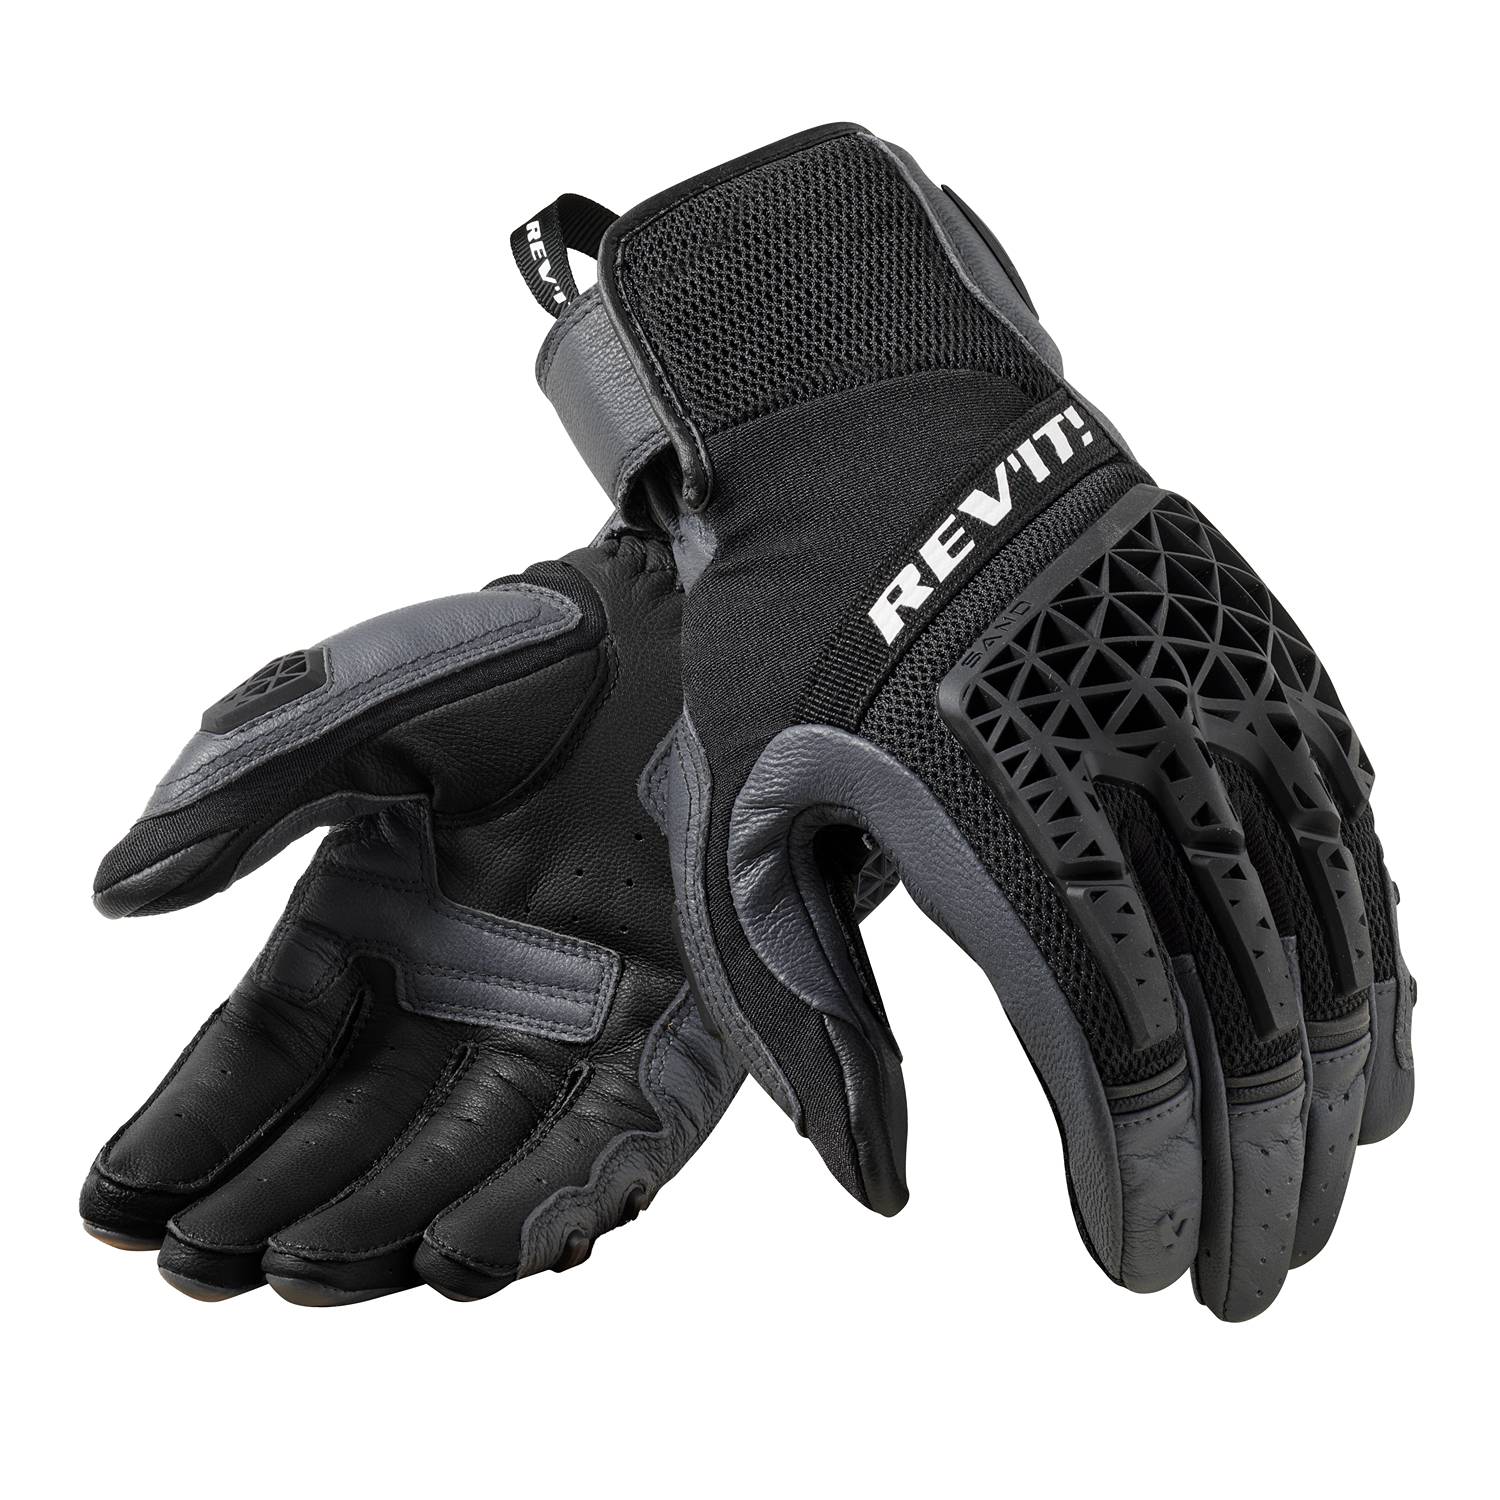 Image of REV'IT! Sand 4 Guantes Gris Negro Talla S